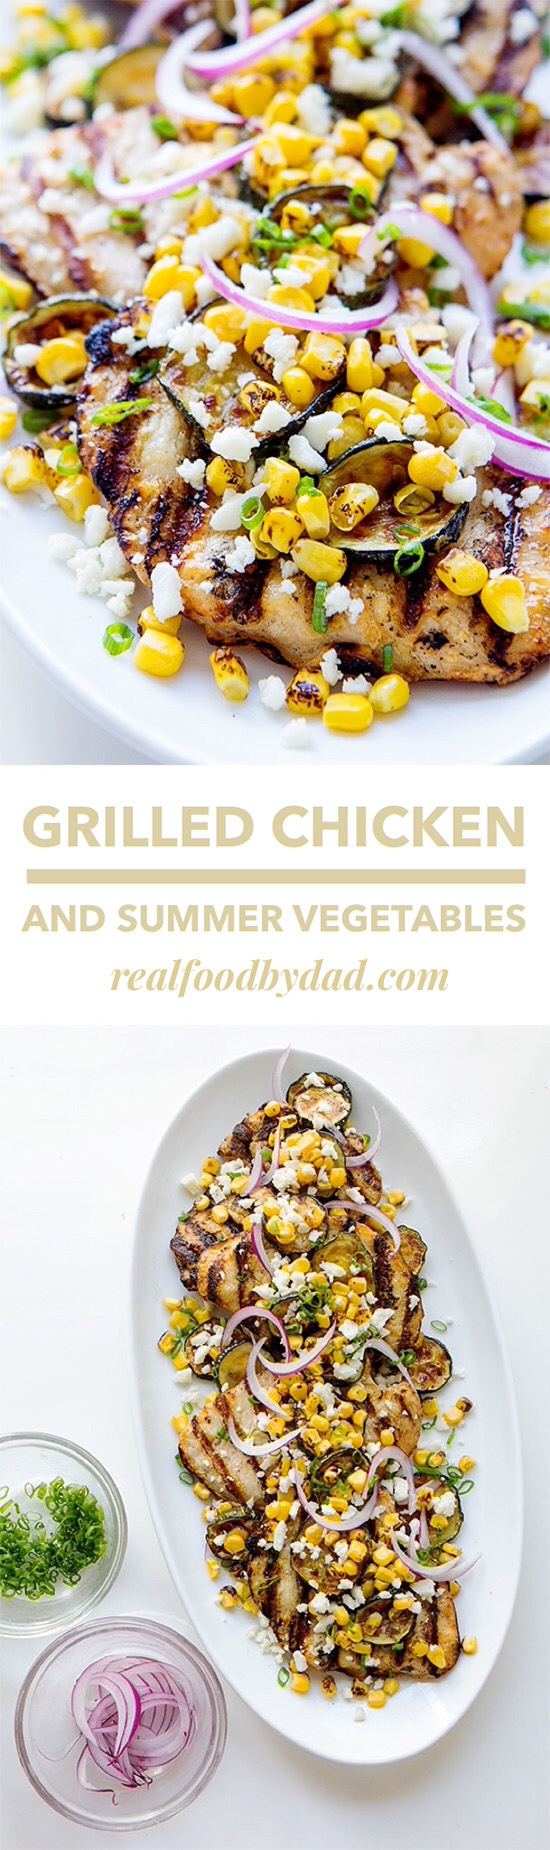 Grilled Chicken and Summer Vegetables from Real Food by Dad